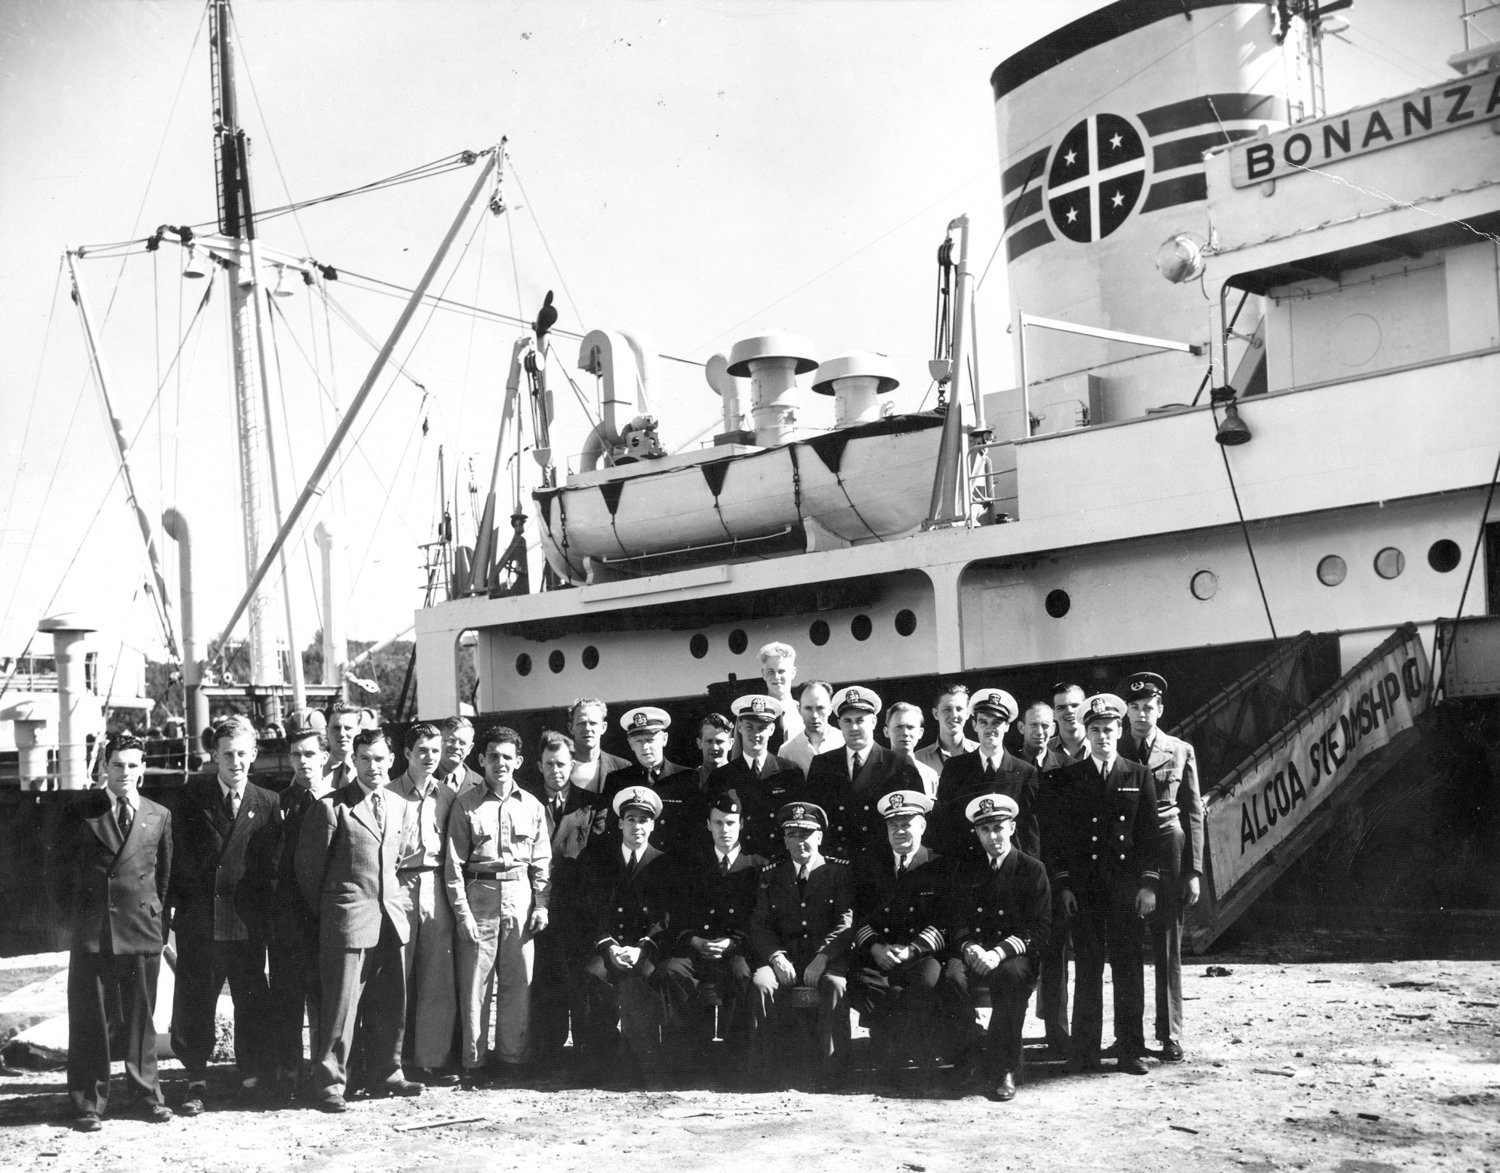 N THE WAKE OF THE WAR: Harry Olsen was a crew member aboard the Bonanza, returning from Europe with troops and cargo when they stopped at Bermuda and had this picture taken. Can you pick out Harry? He can, of course.